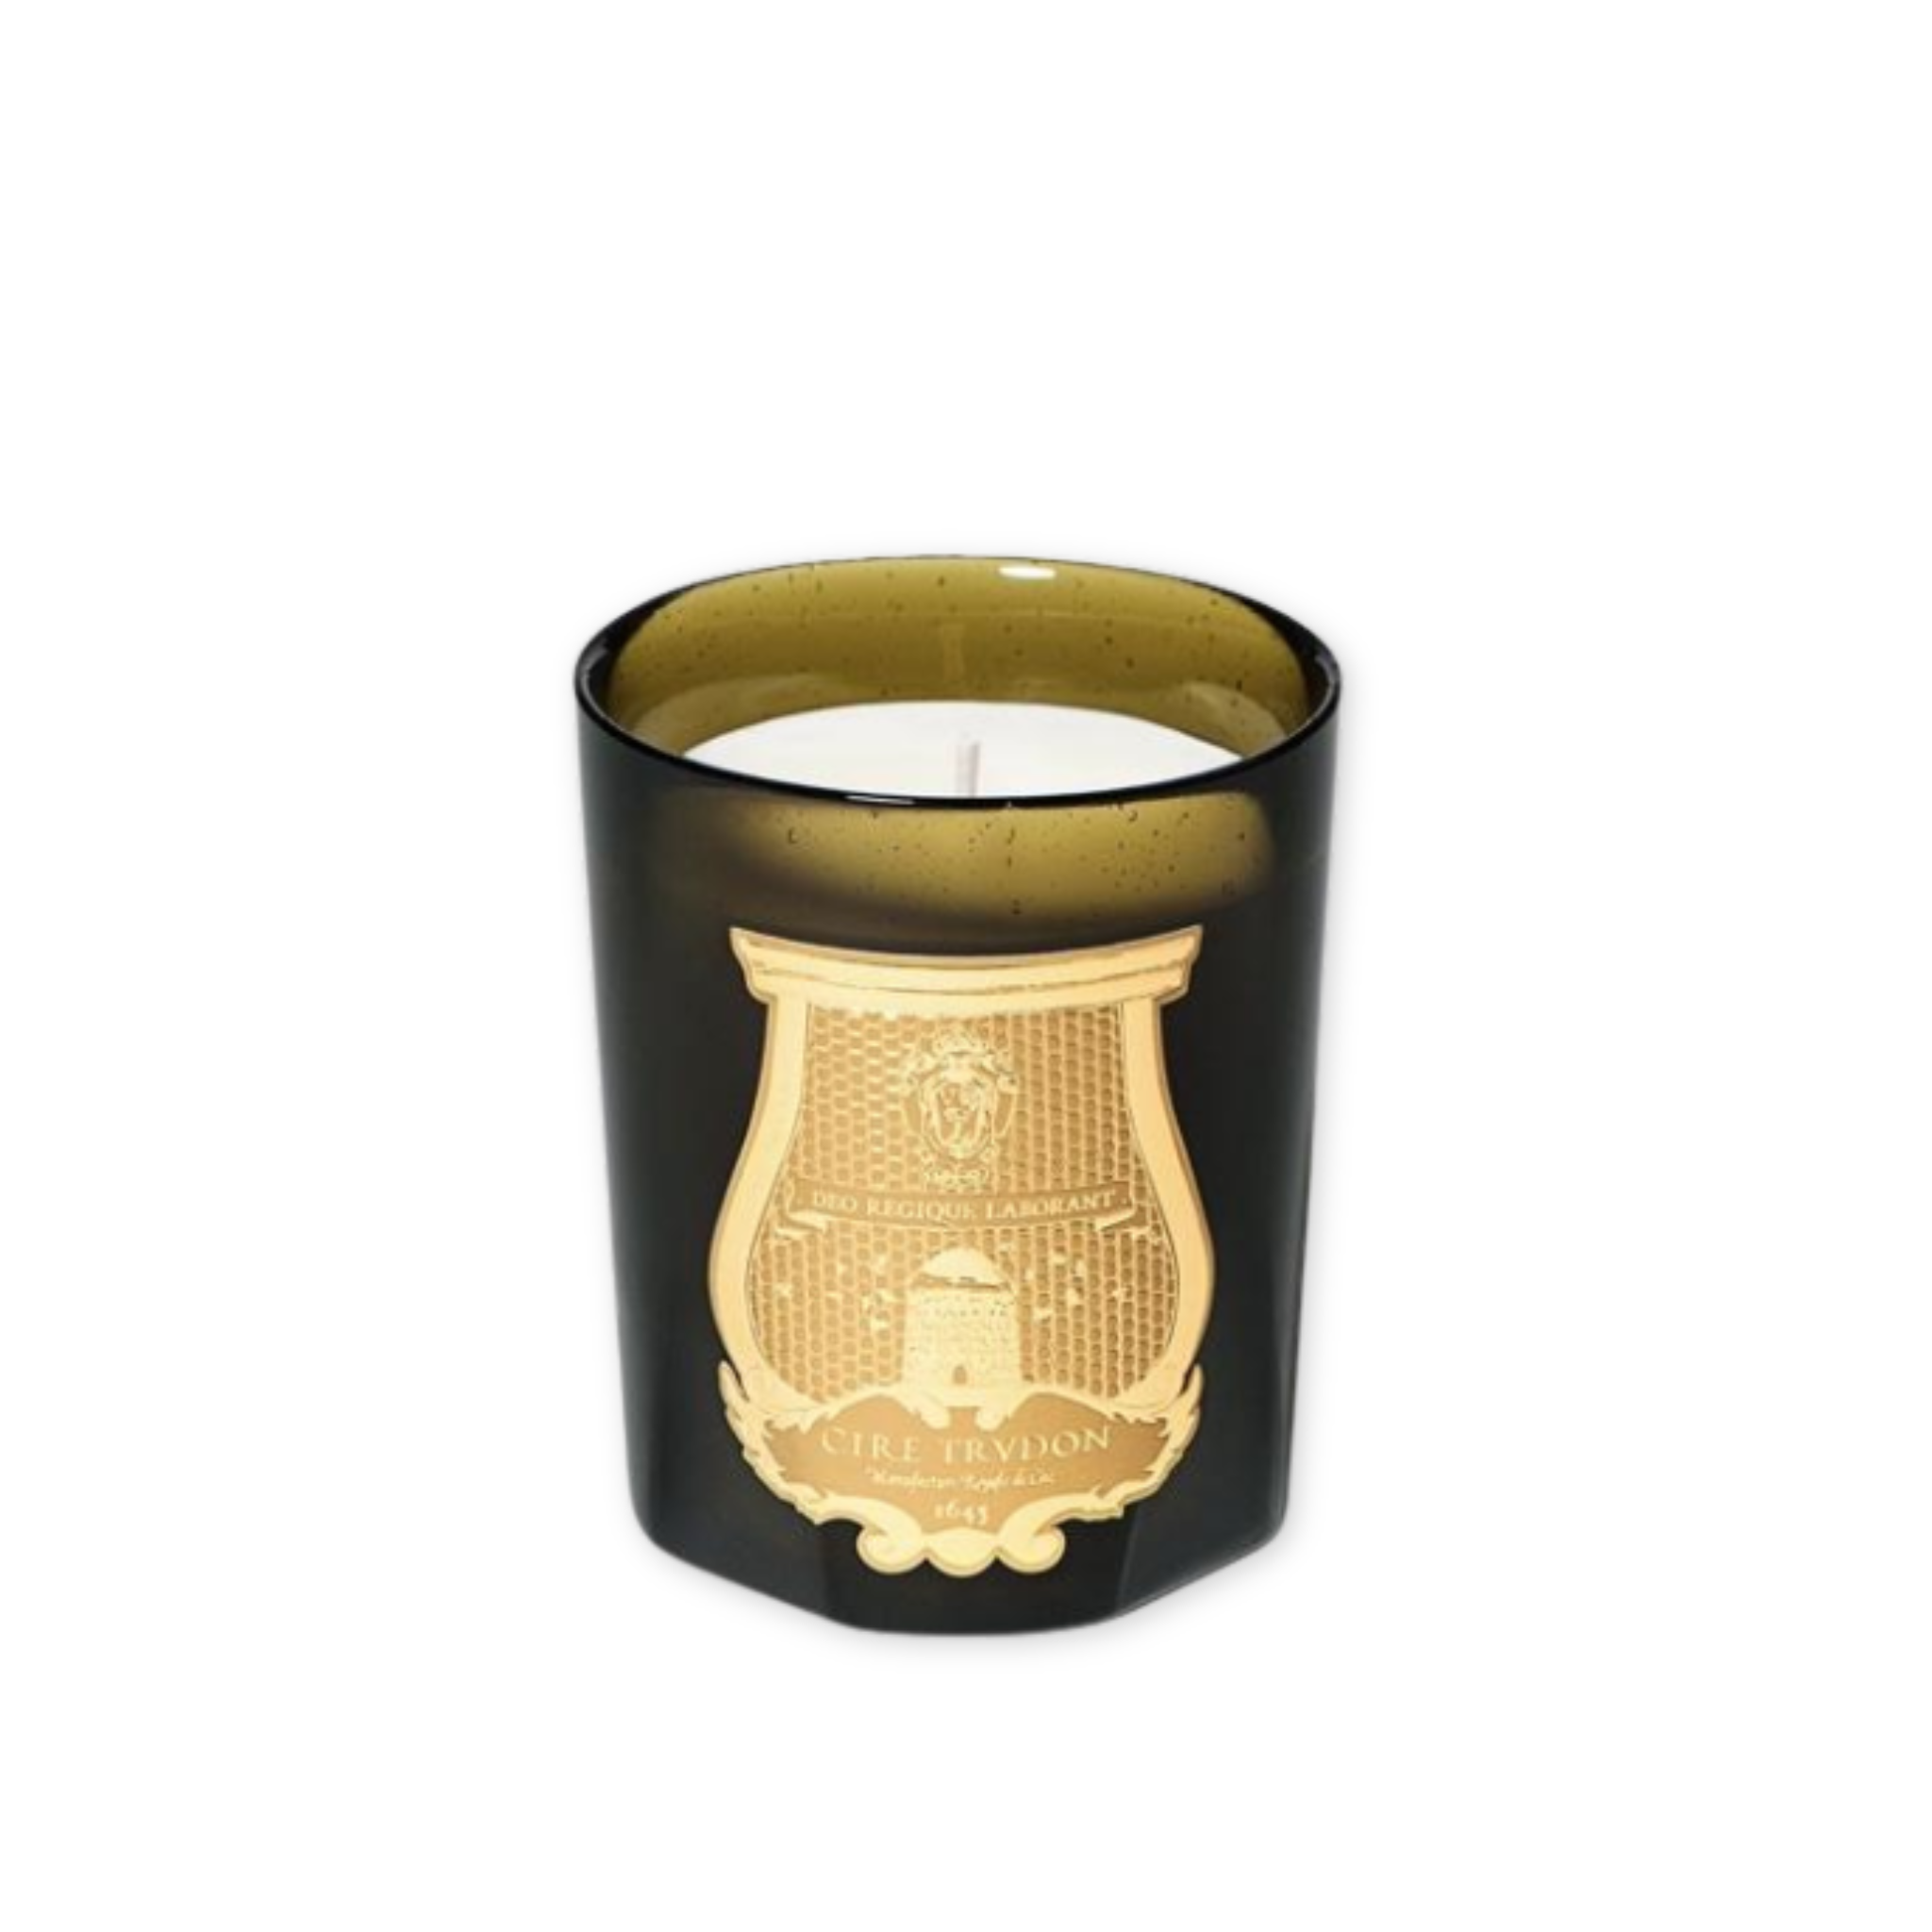 tea and vetiver scented candle